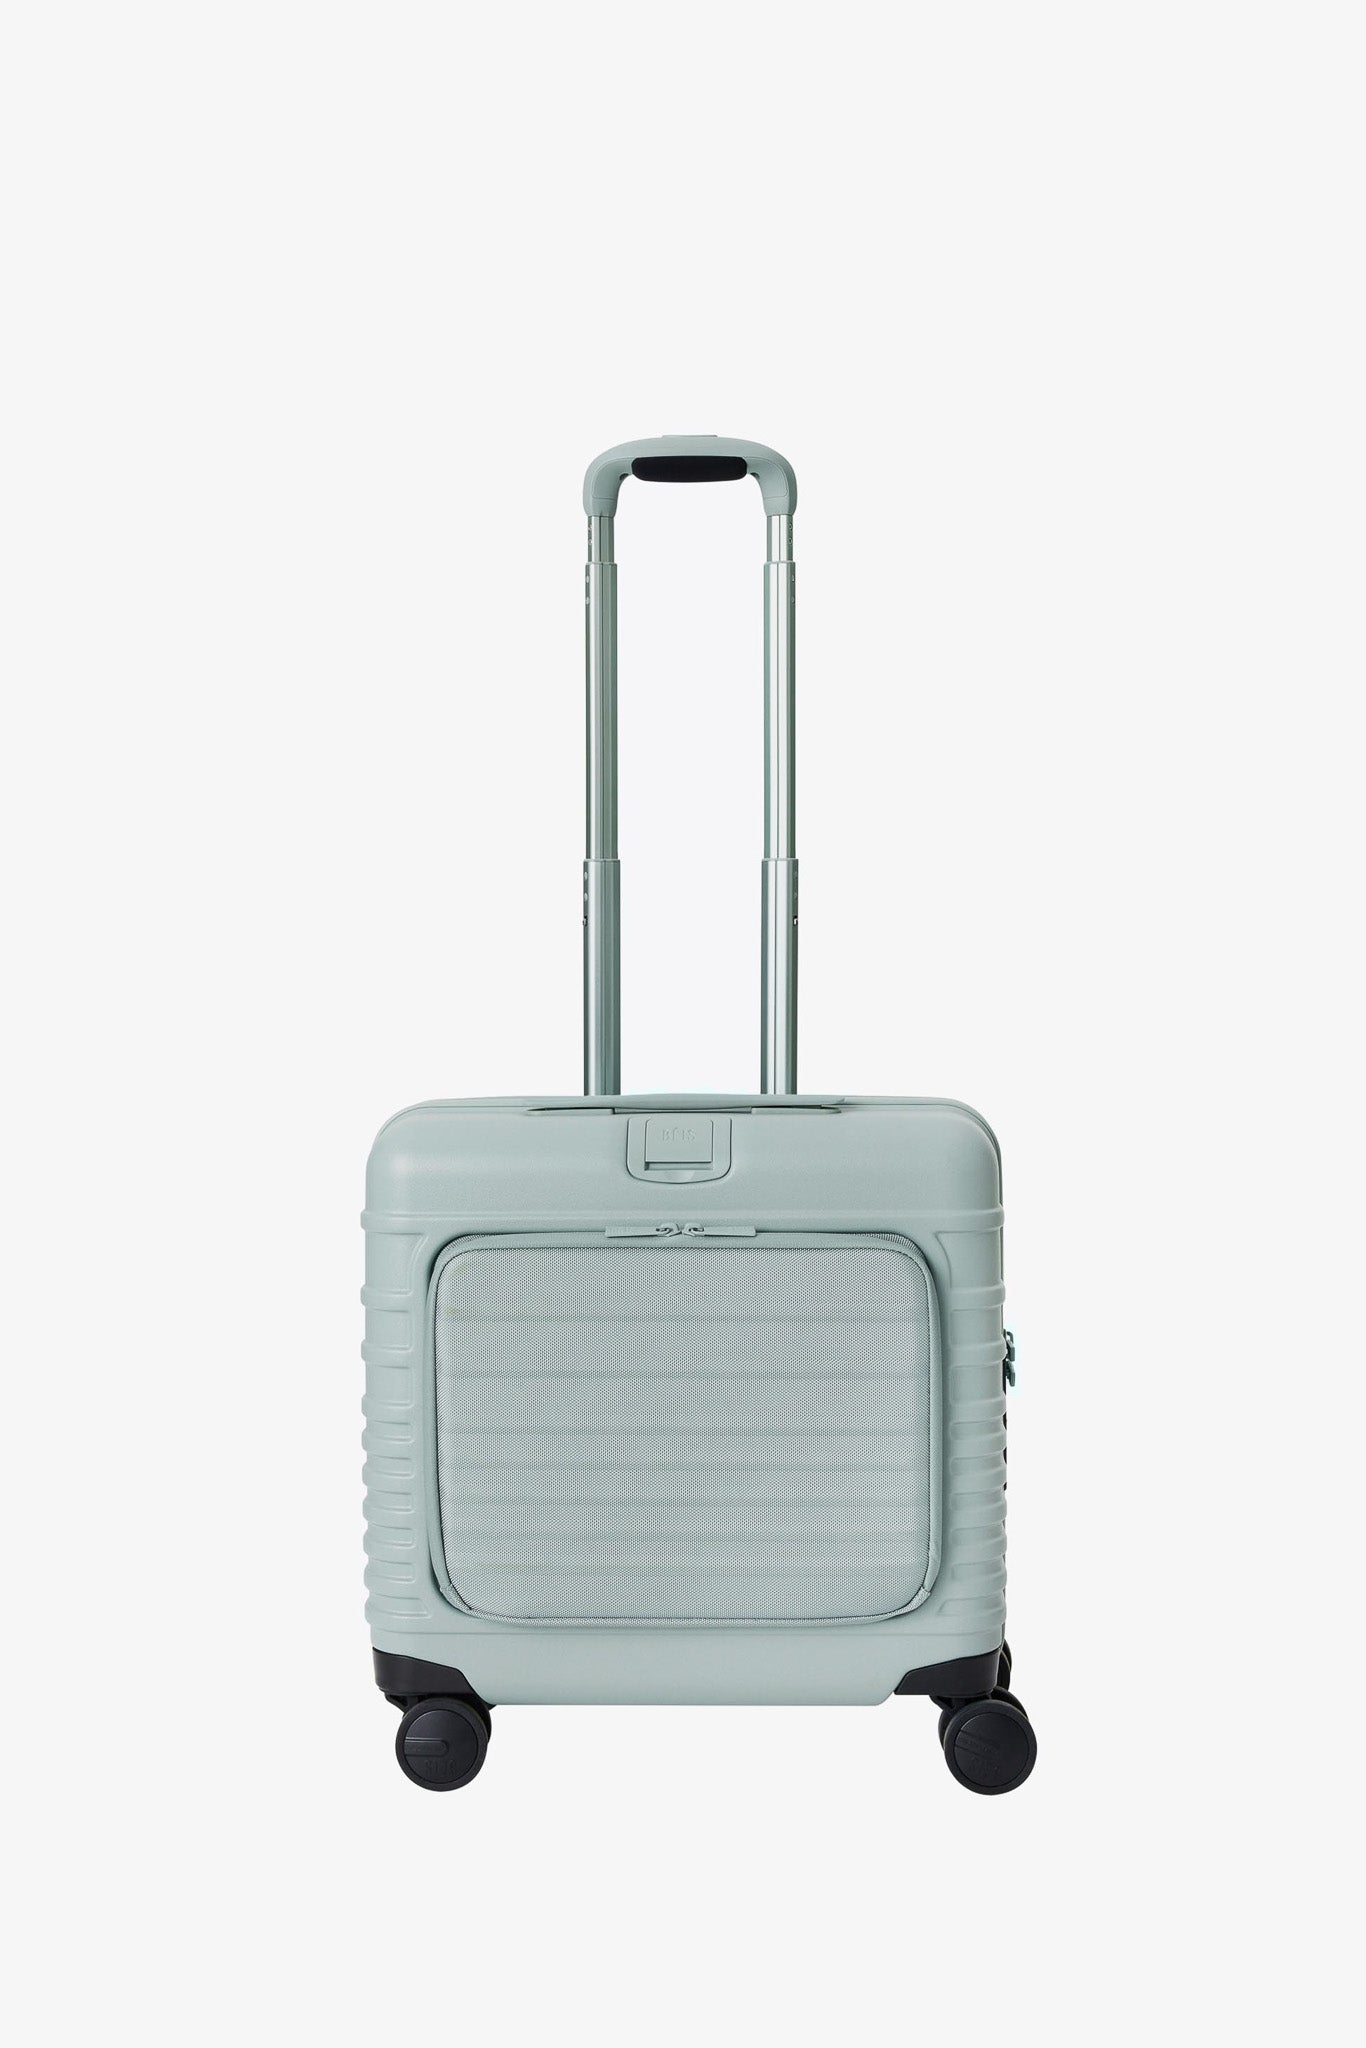 Family Luggage & Bags